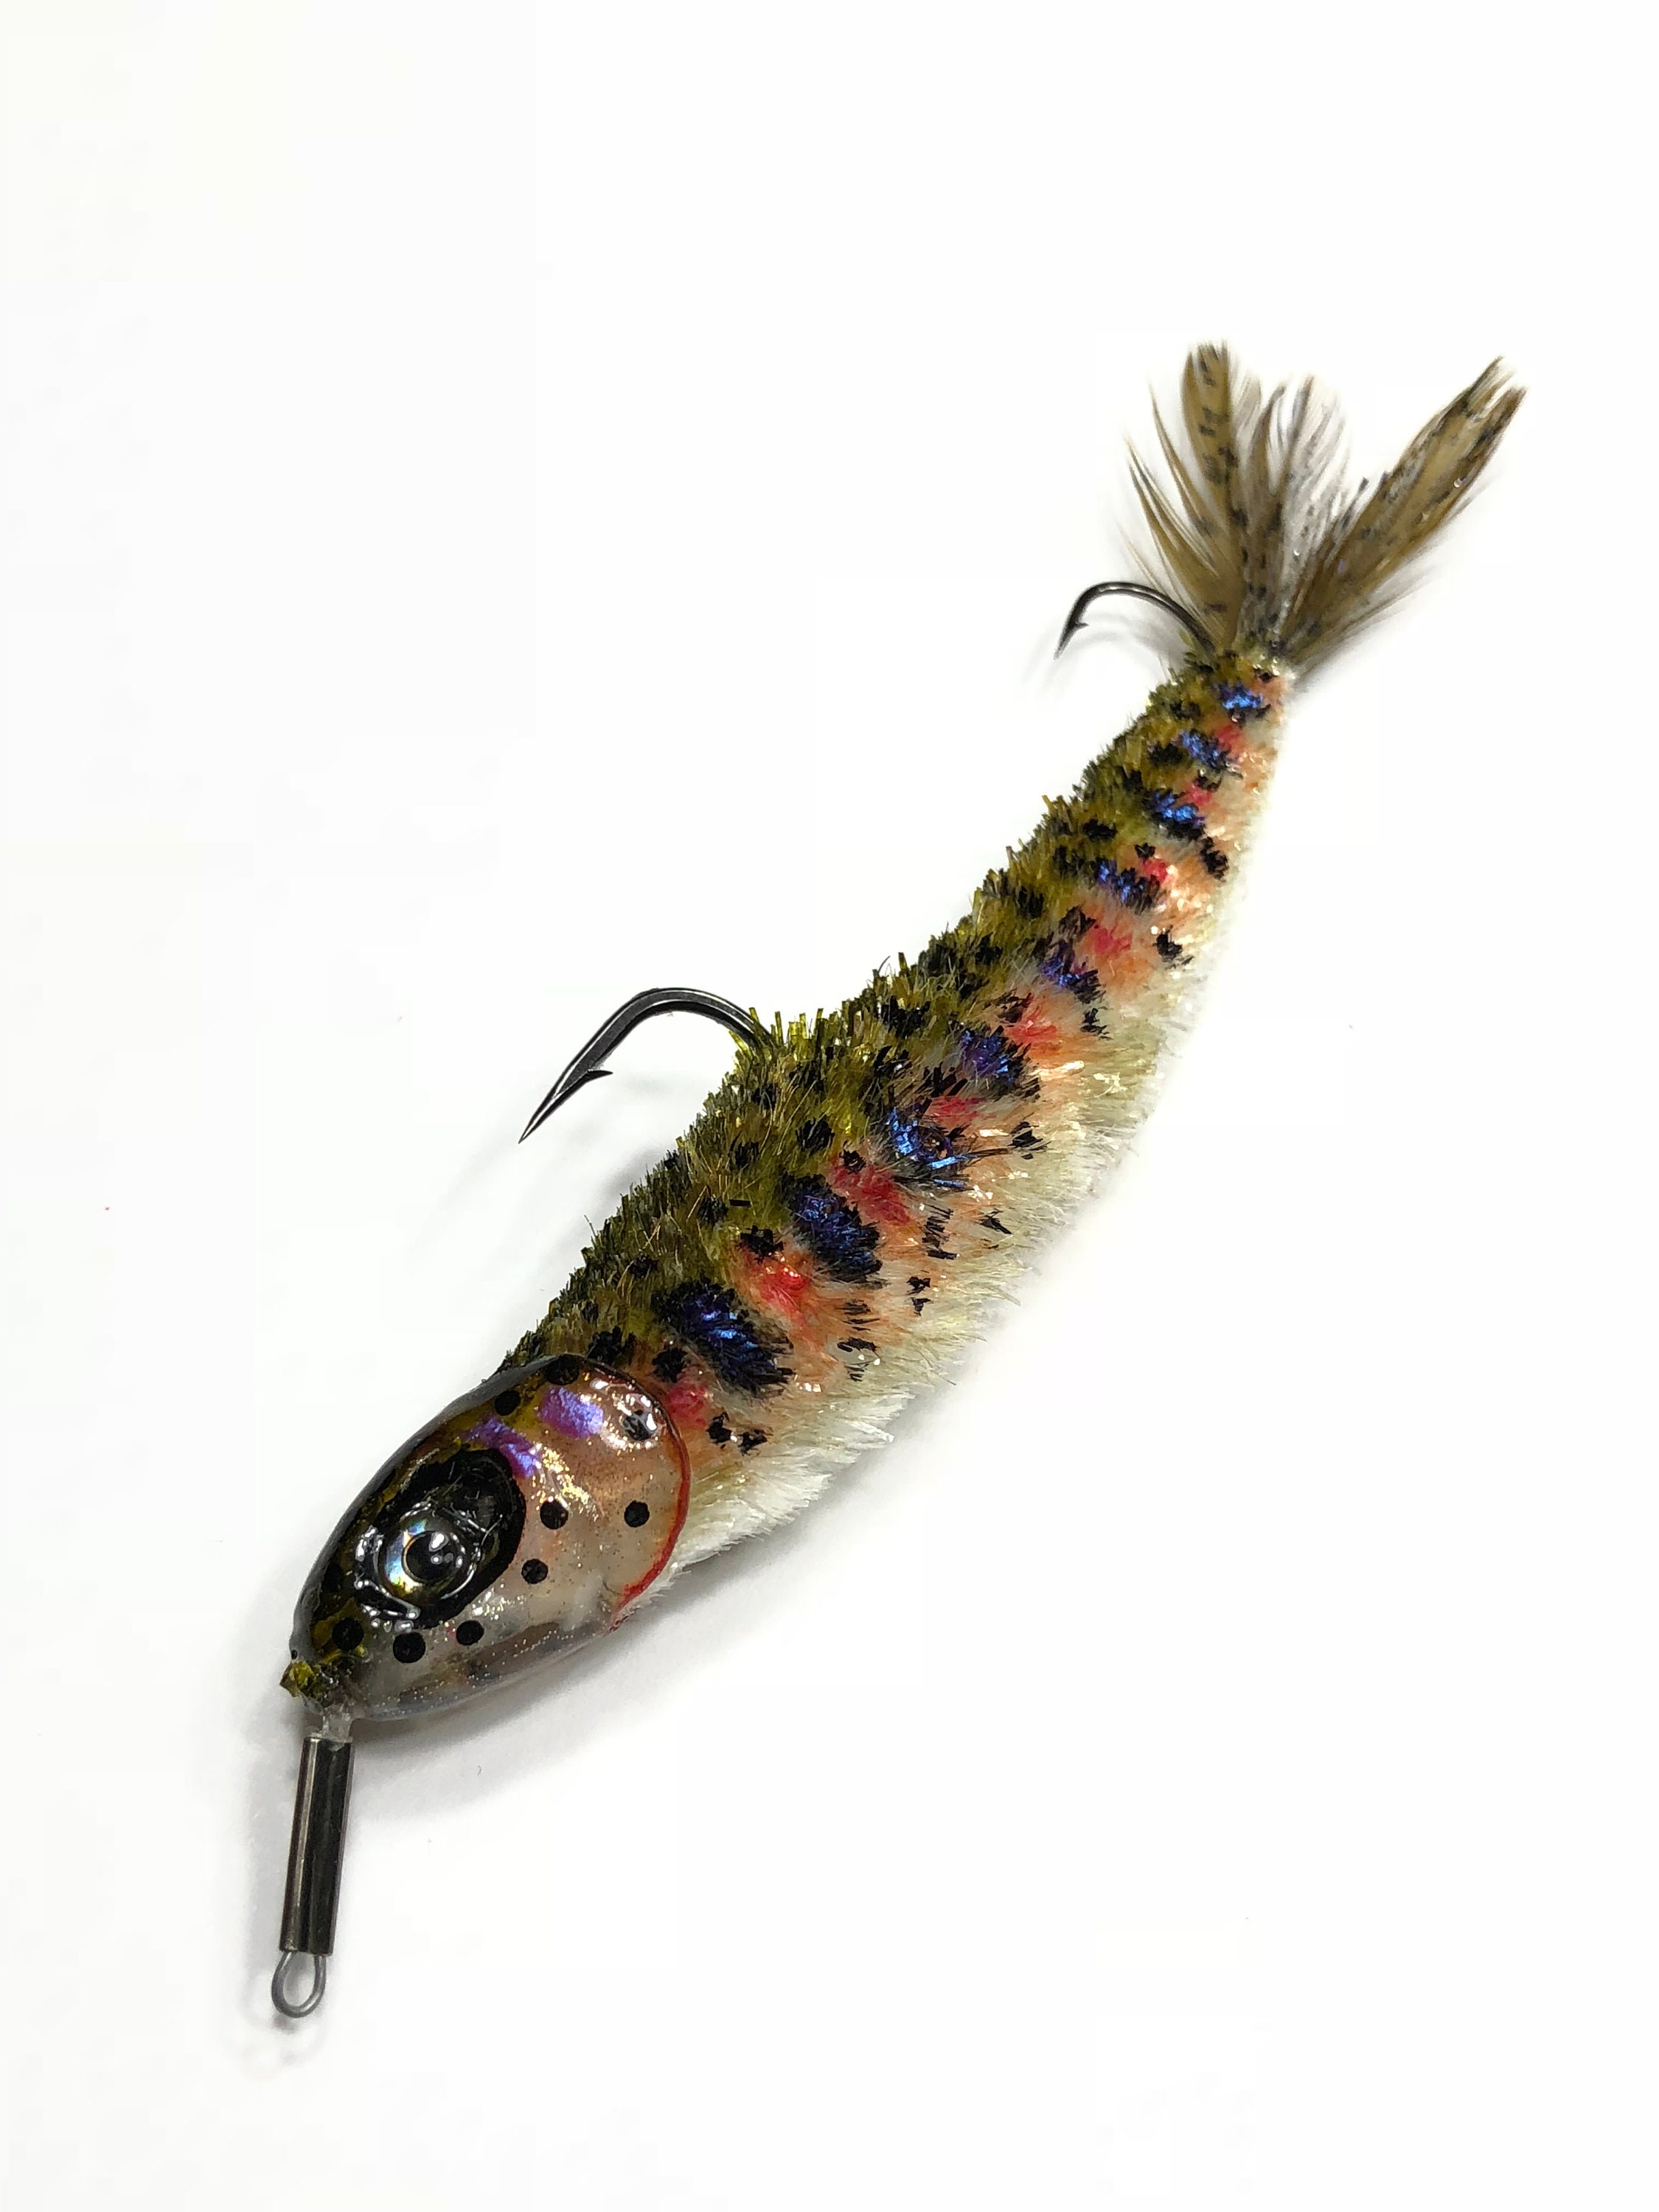 Rainbow Recurve Zipstick Ready to Go Fly Fishing or Spin Rod Lure